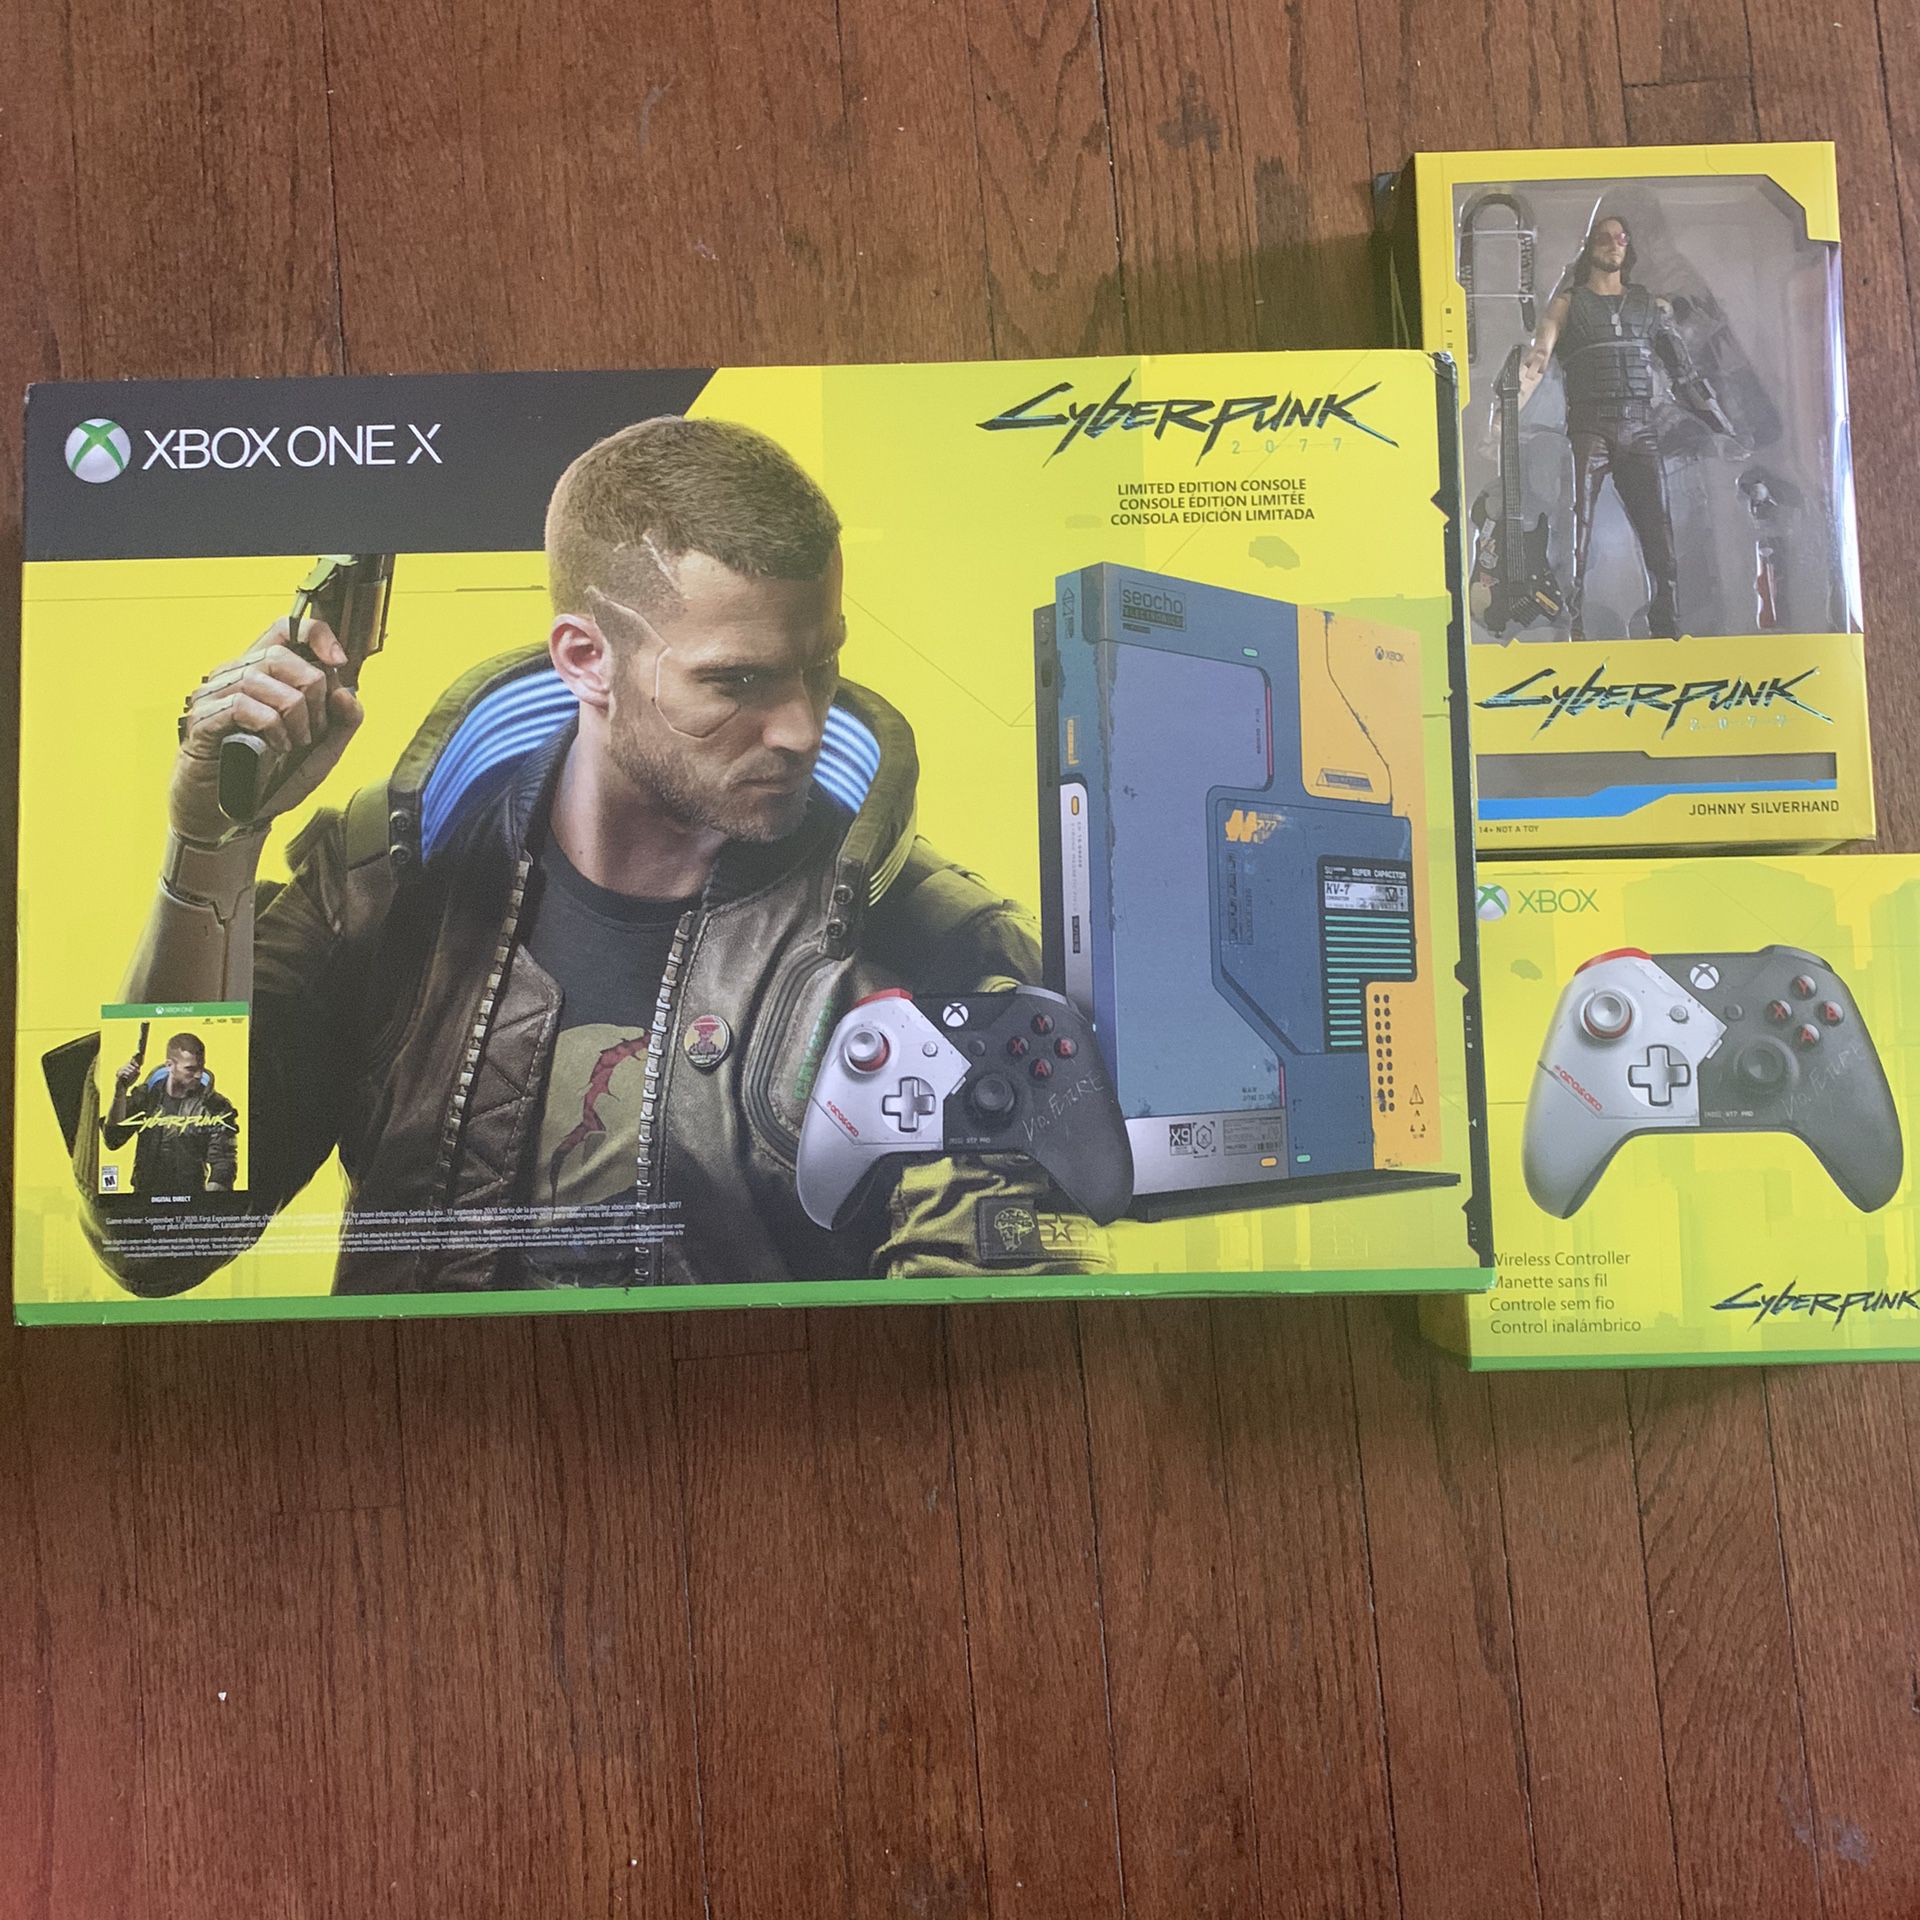 NEW Xbox One X Cyberpunk 2077 Limited Edition Bundle (1TB) with controller and action figure